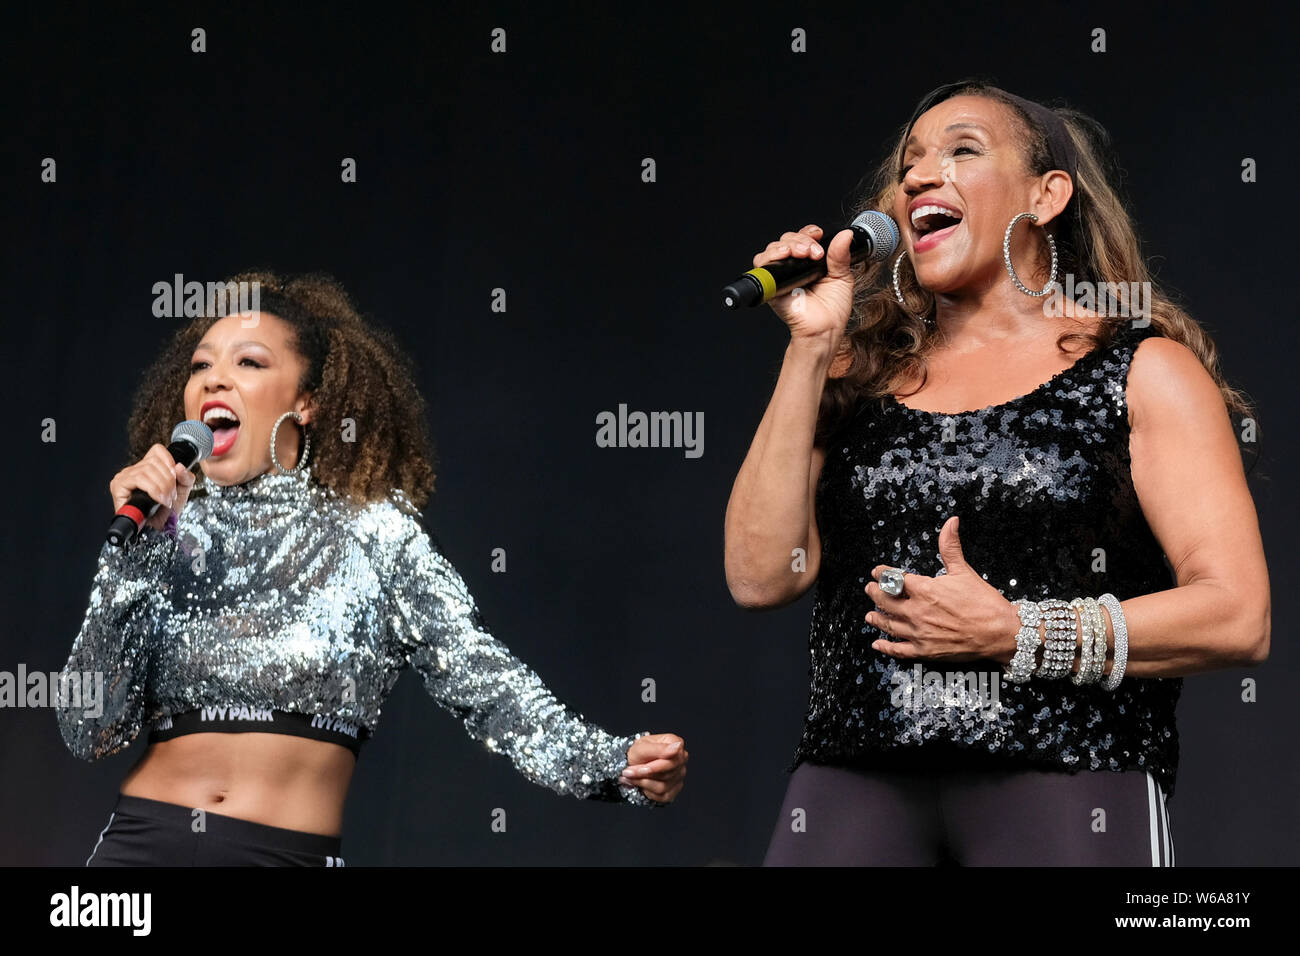 Lulworth, UK. 28th July, 2019. Kathy Sledge, one of the original female vocalists with Grammy Award winning American musical vocal group Sister Sledge, performing live on stage with a backing vocalist at Camp Bestival family music festival in Lulworth, Dorset, UK Credit: SOPA Images Limited/Alamy Live News Stock Photo